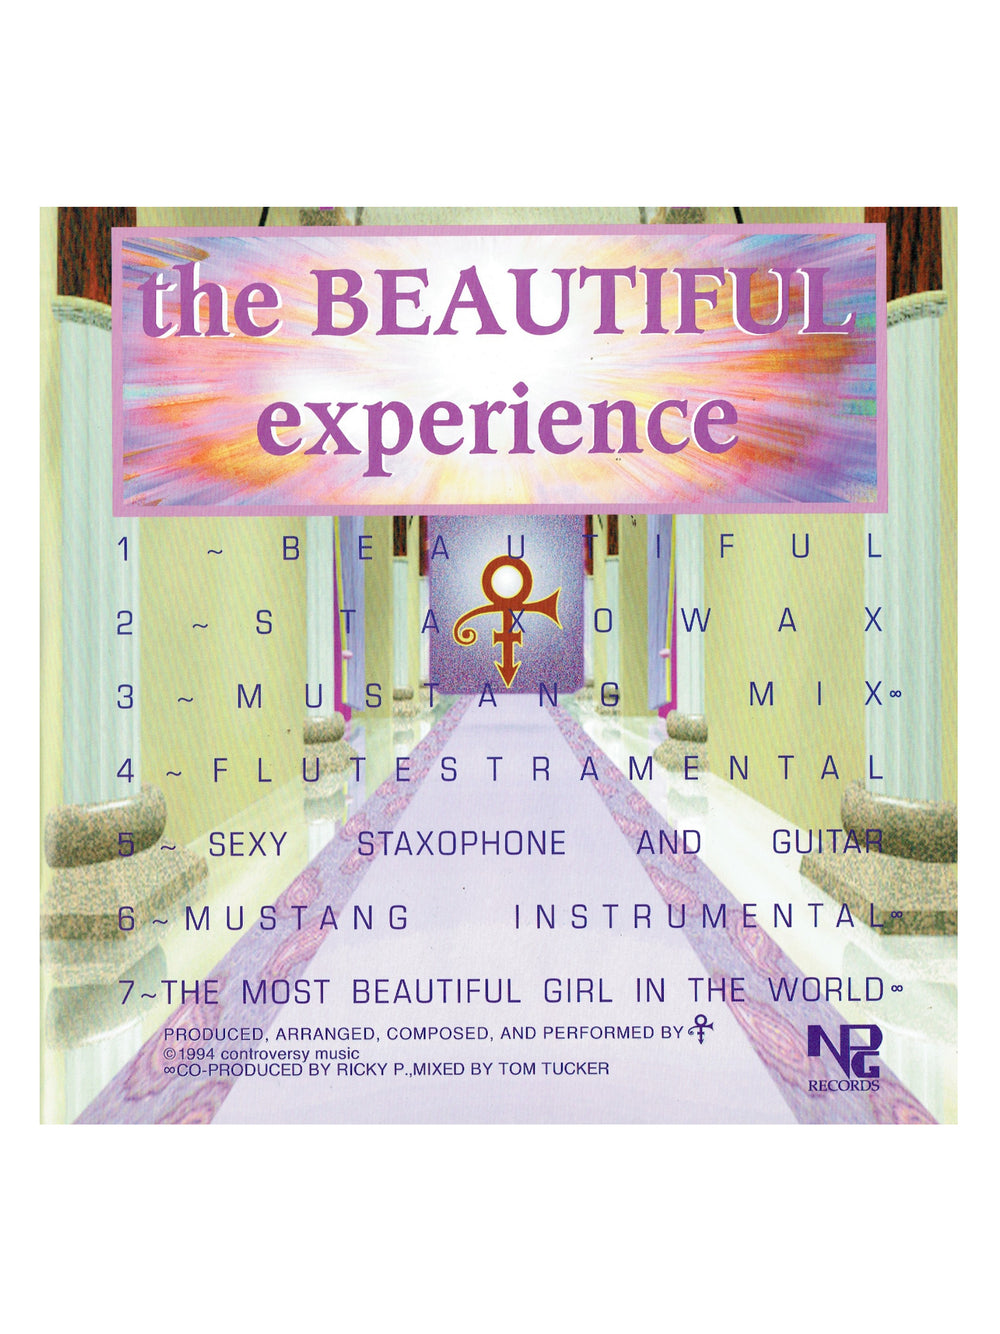 Prince - The Beautiful Experience Vinyl Album US WITH BOOKLET Preloved NM: 1994